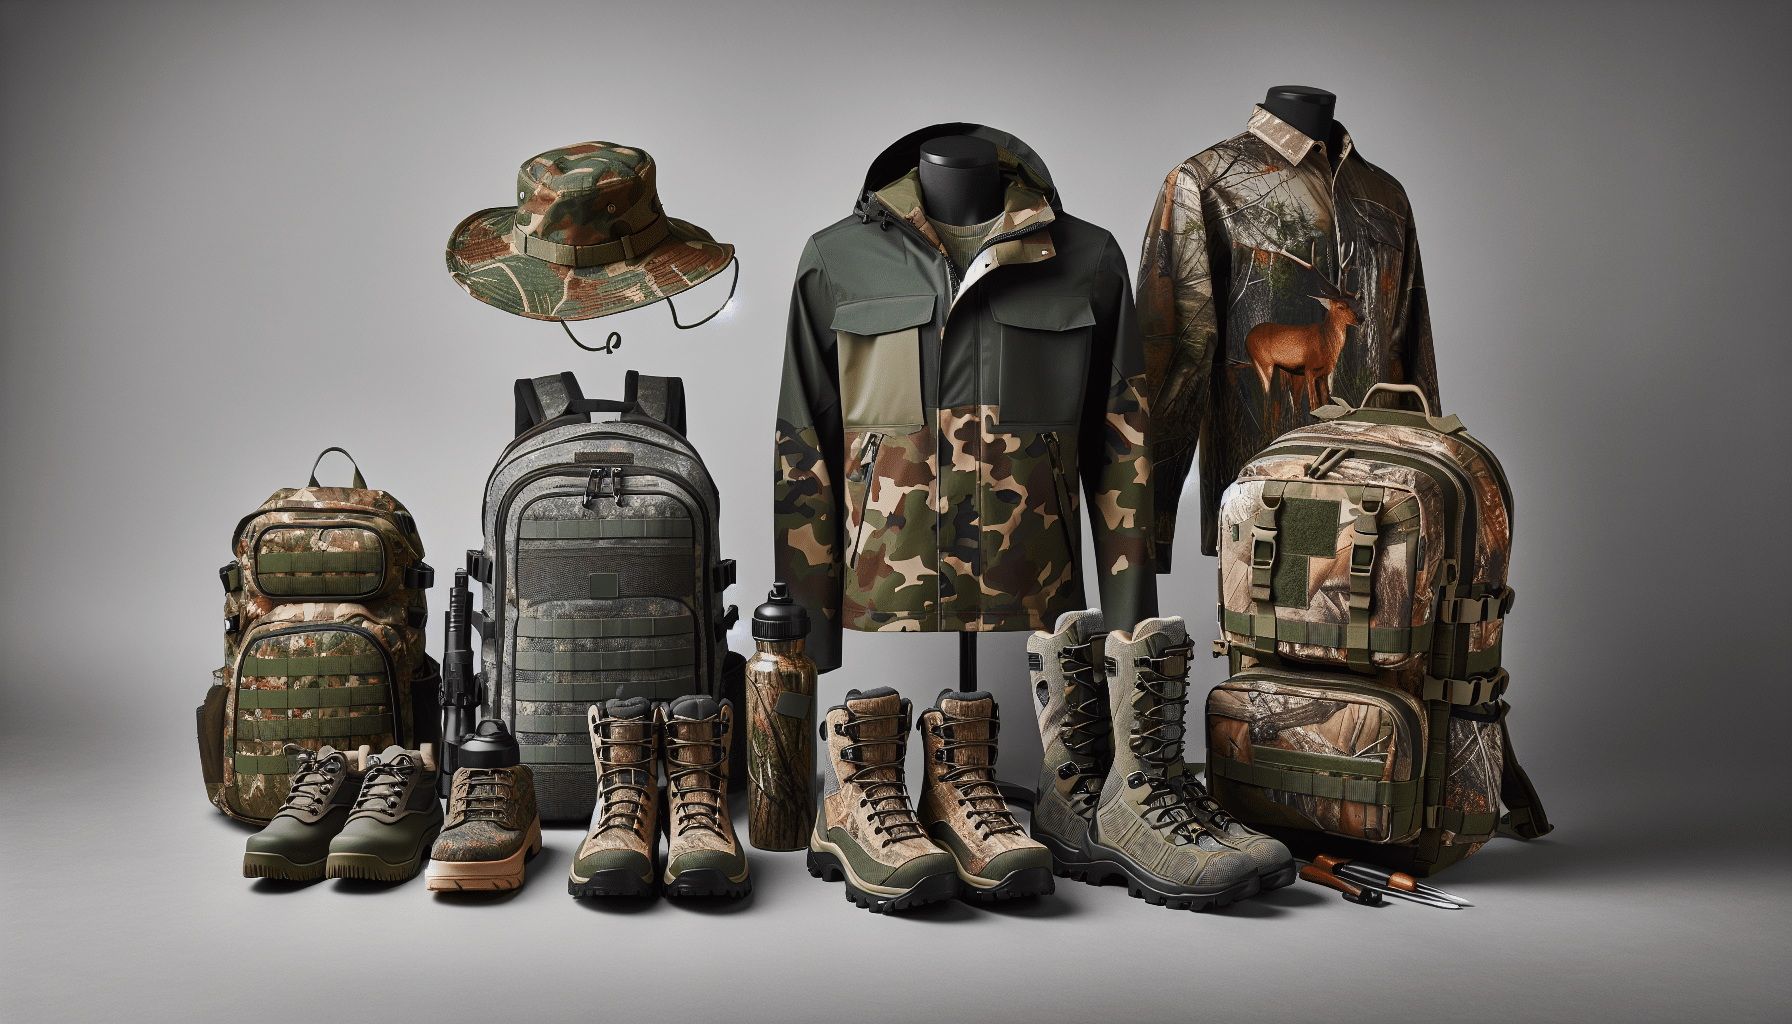 A variety of top-notch camouflage gear set against a neutral background. Include items such as a camouflaged jacket and pants made from durable, weather-resistant fabric, a wide-brimmed camouflage hat, a pair of hunting boots with woodland print, a camouflaged backpack with multiple compartments, and a camouflage-patterned water bottle. All items should be devoid of any brand names or logos to ensure neutrality. The array of items conveys the notion of readiness for outdoor exploration or a hunting expedition. The overall look is modern, practical, and designed for utility.